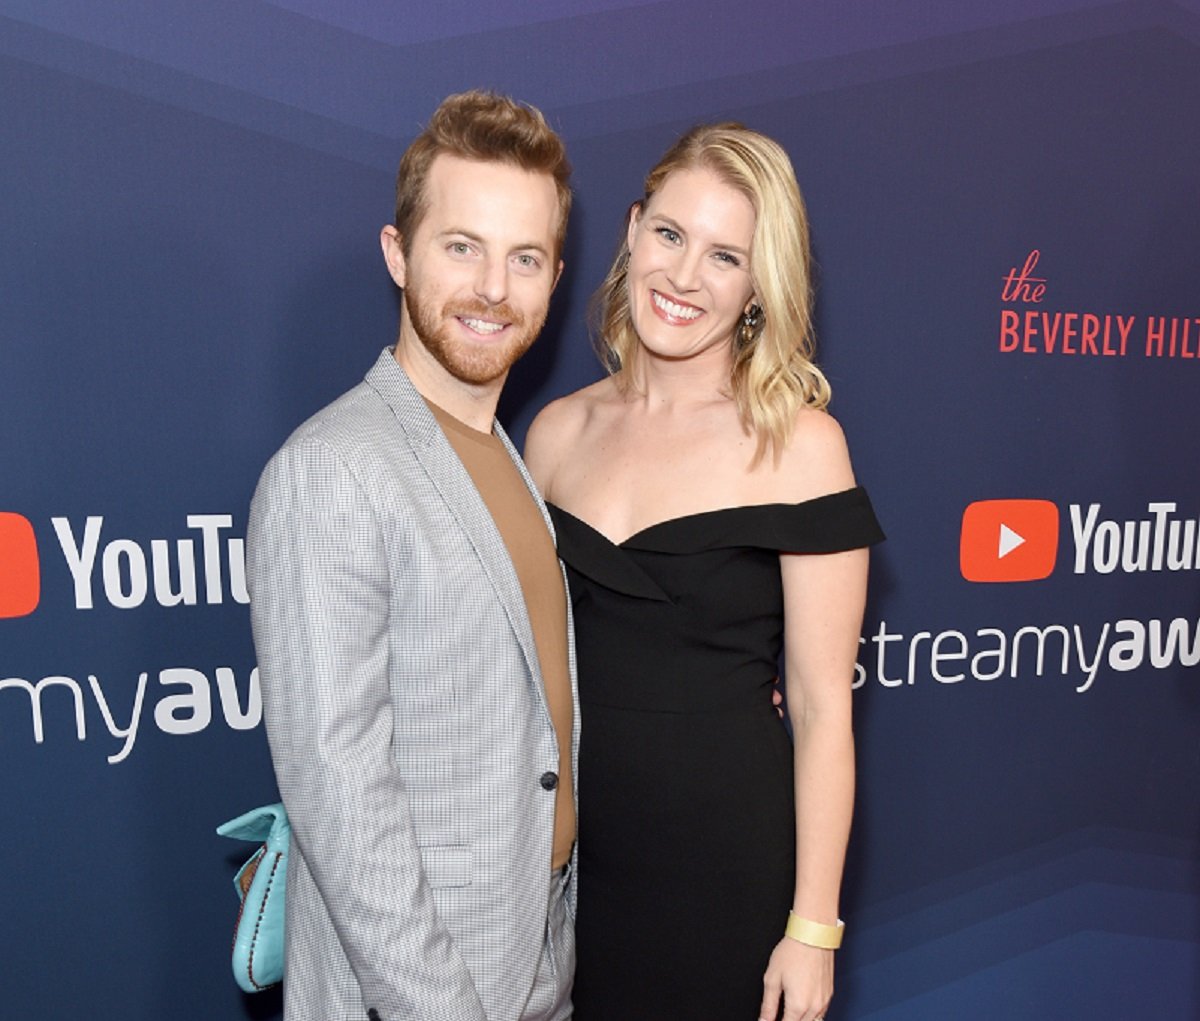 Ned Fulmer and Ariel Fulmer pose together at the 9th Annual Streamy Awards